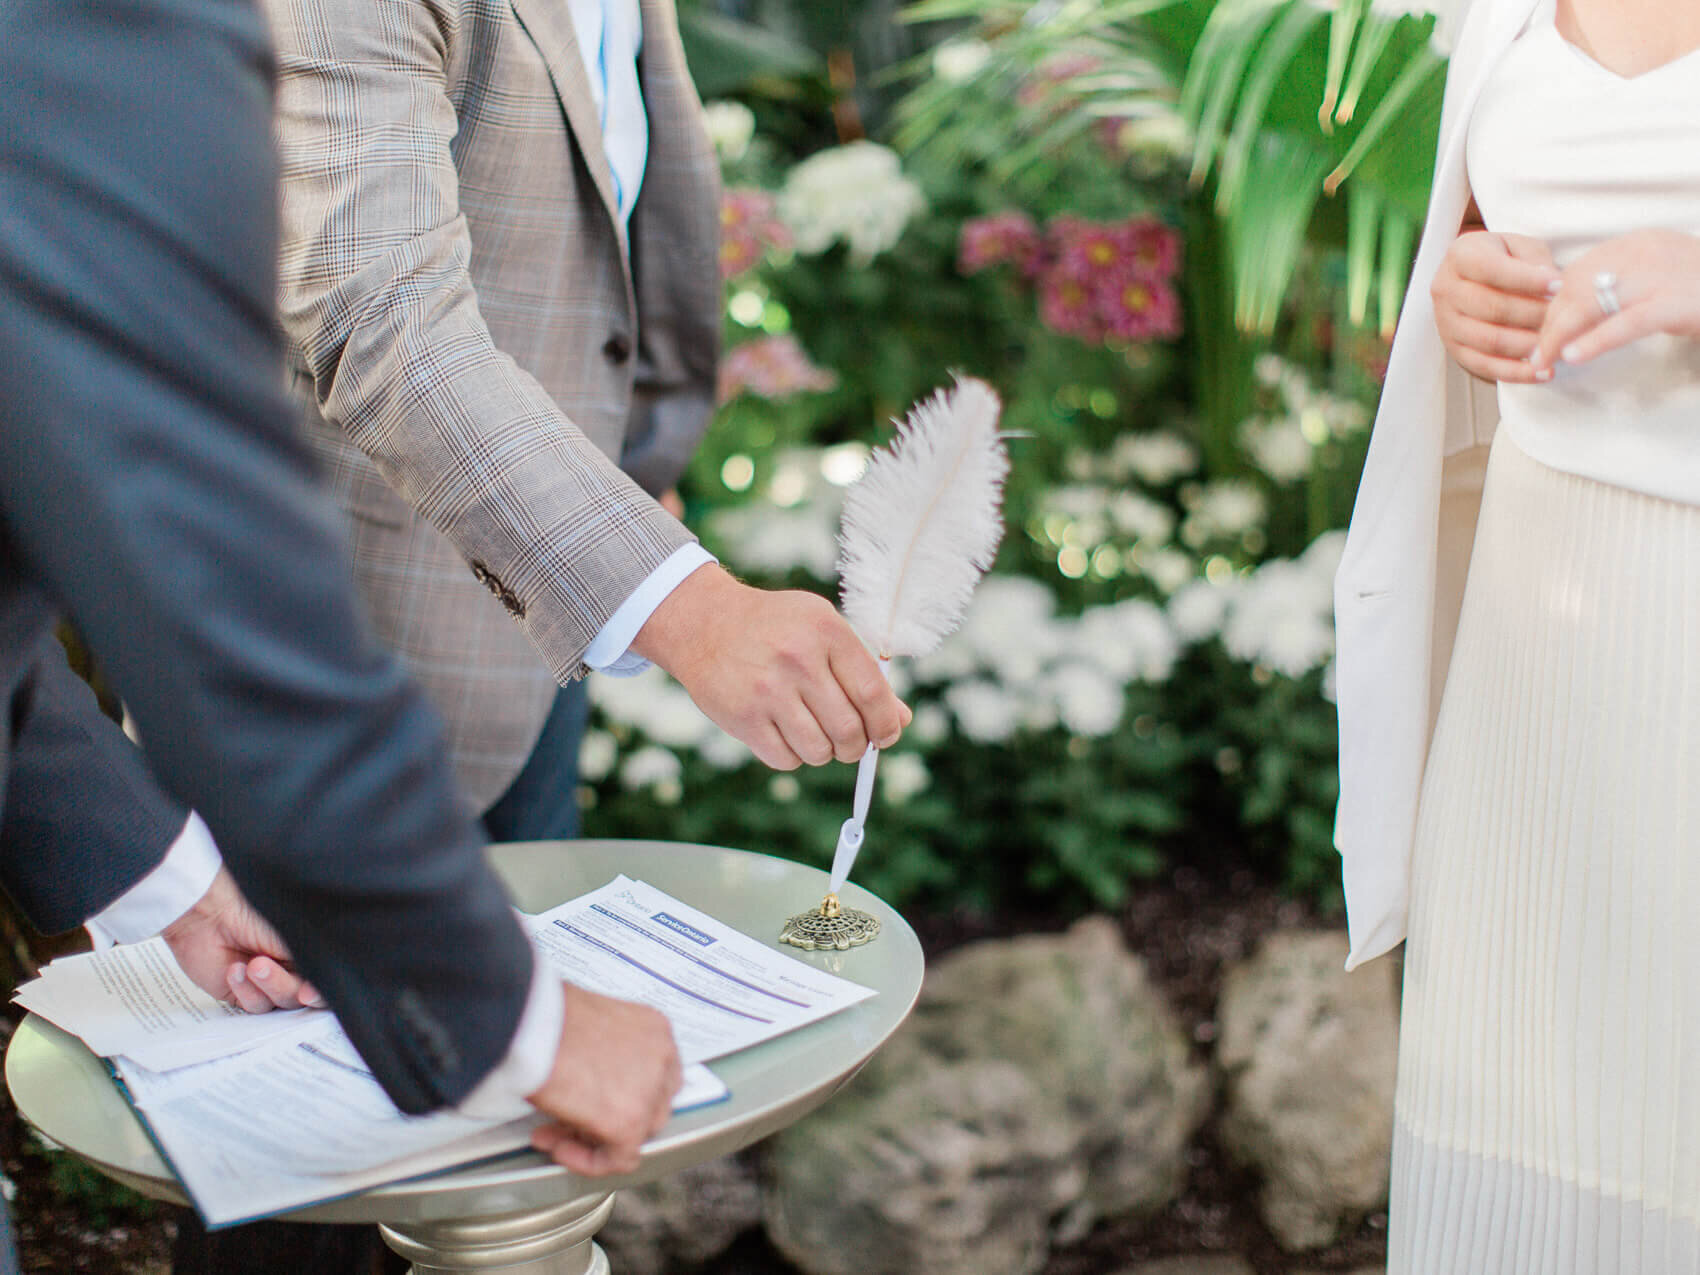 candid wedding ceremony photograph from and intimate allen gardens elopement